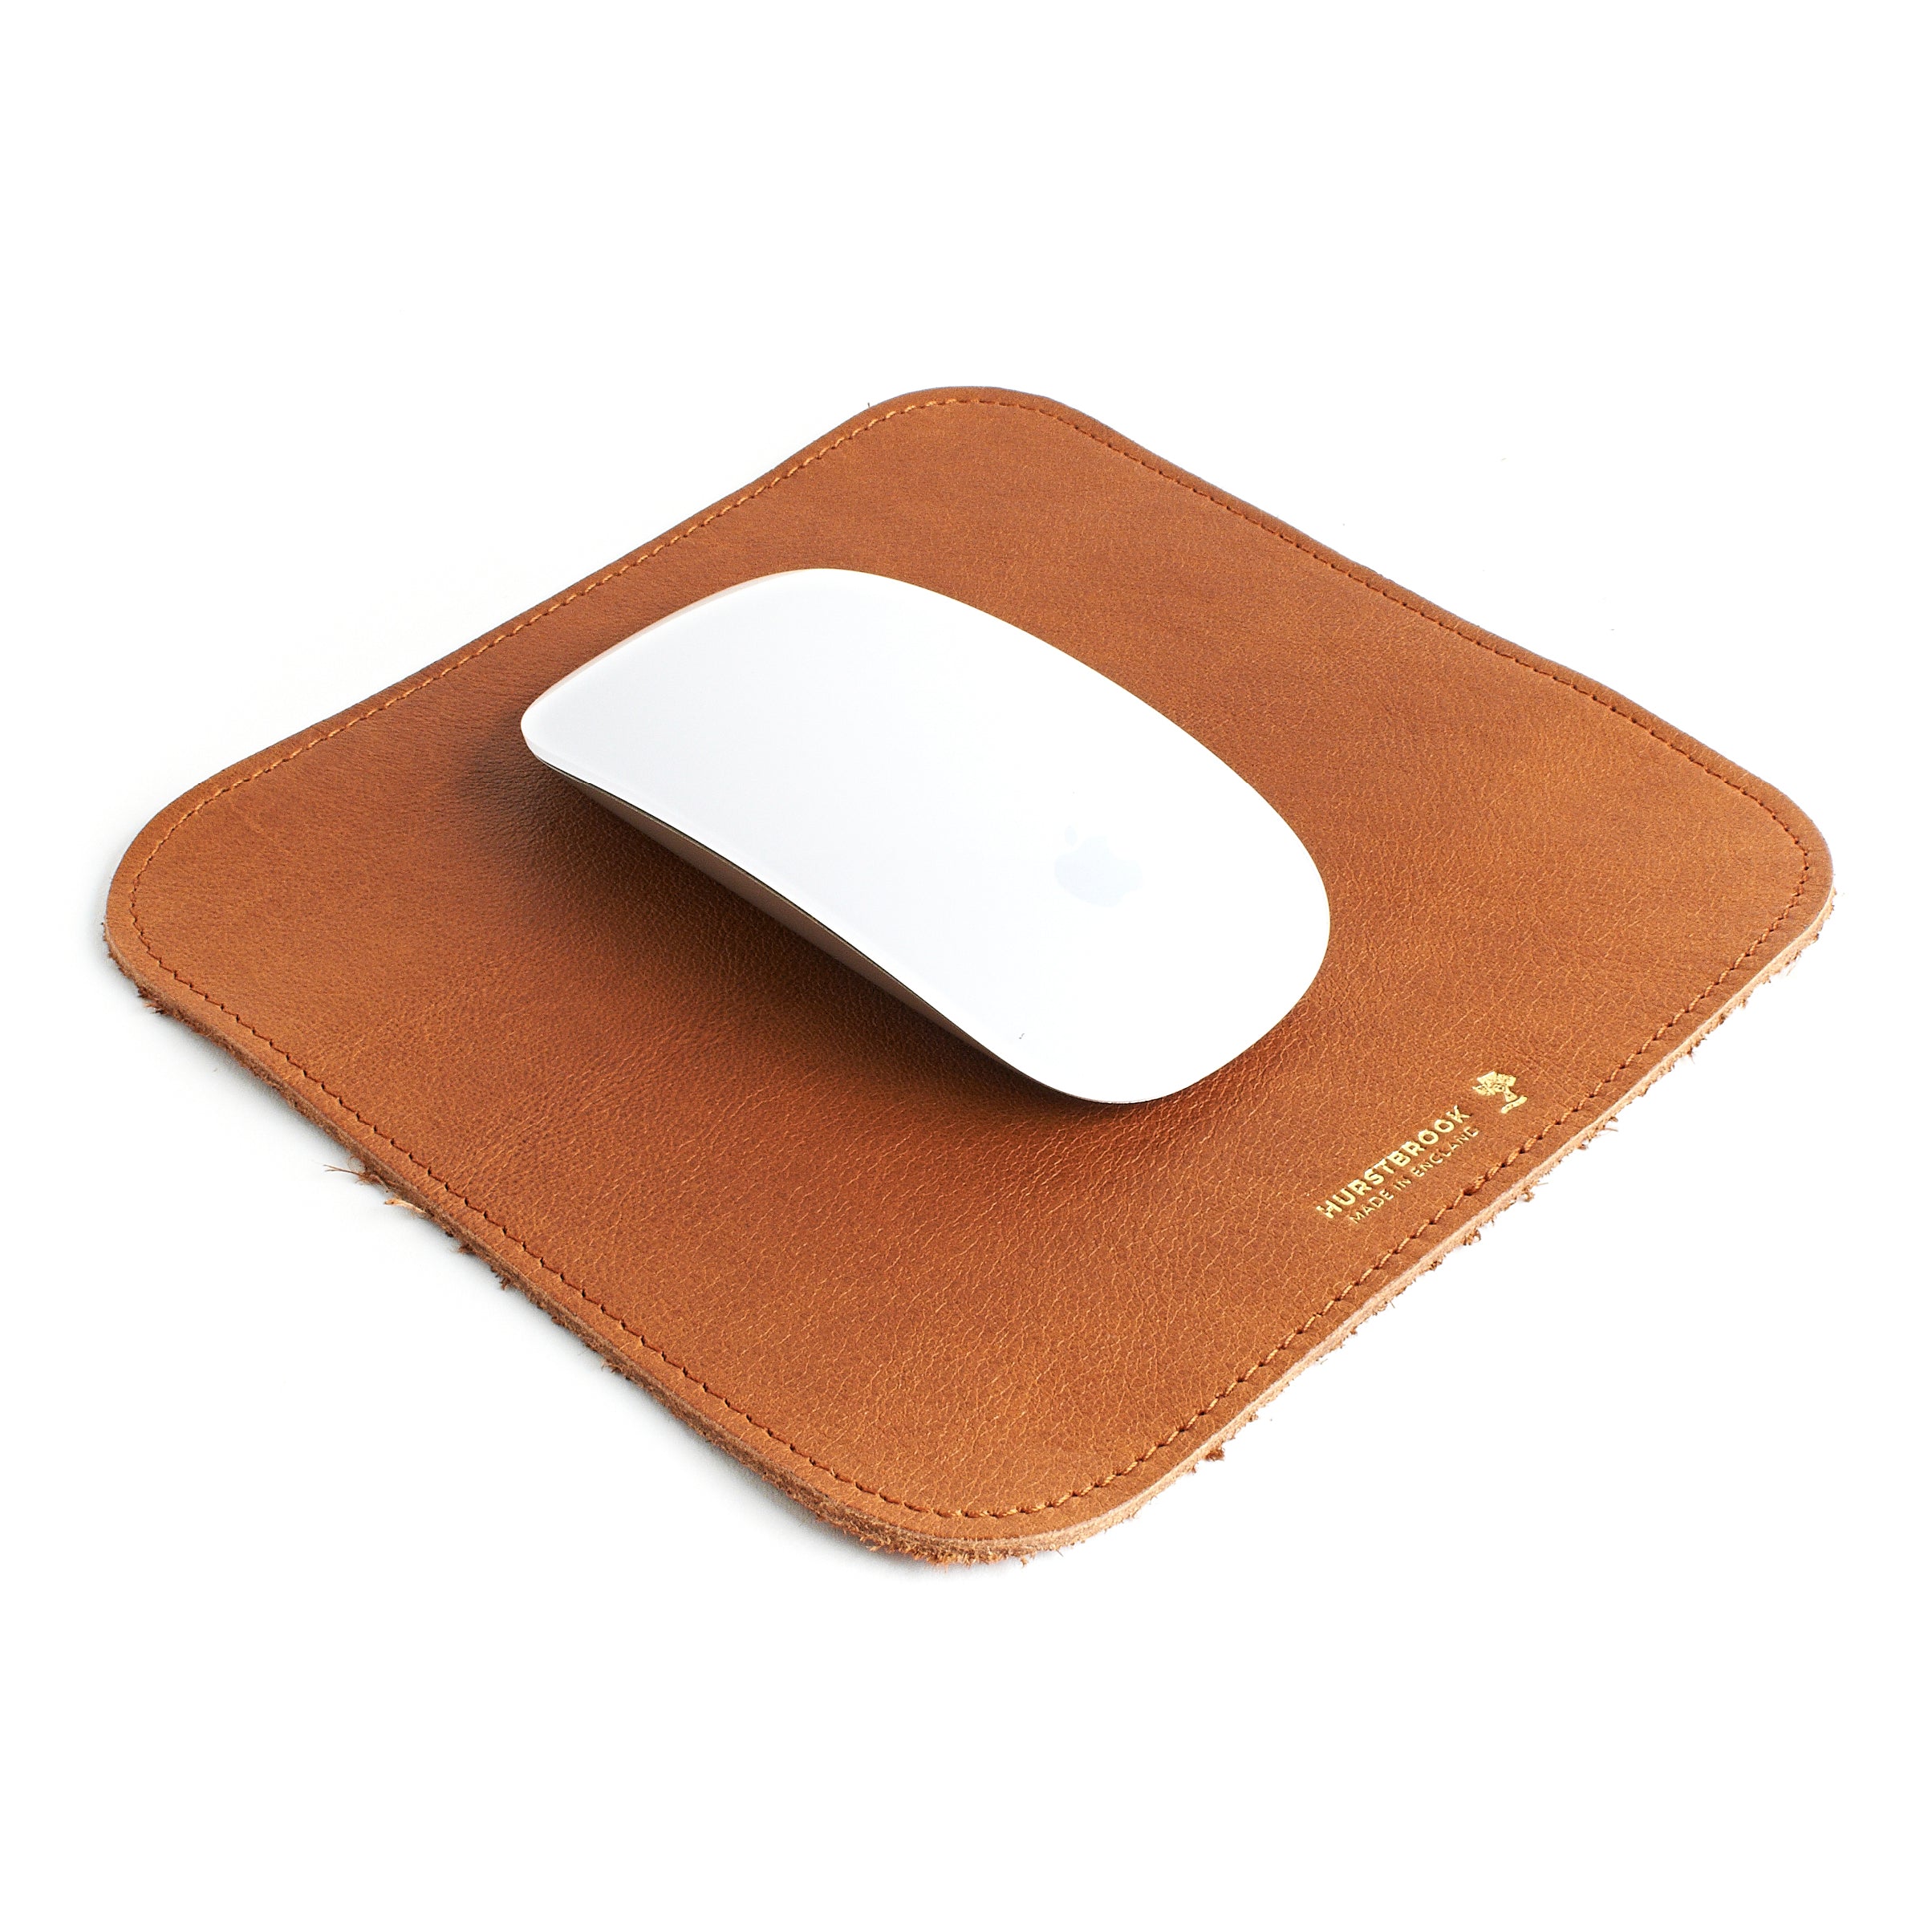 Tan Leather Mouse Mat 